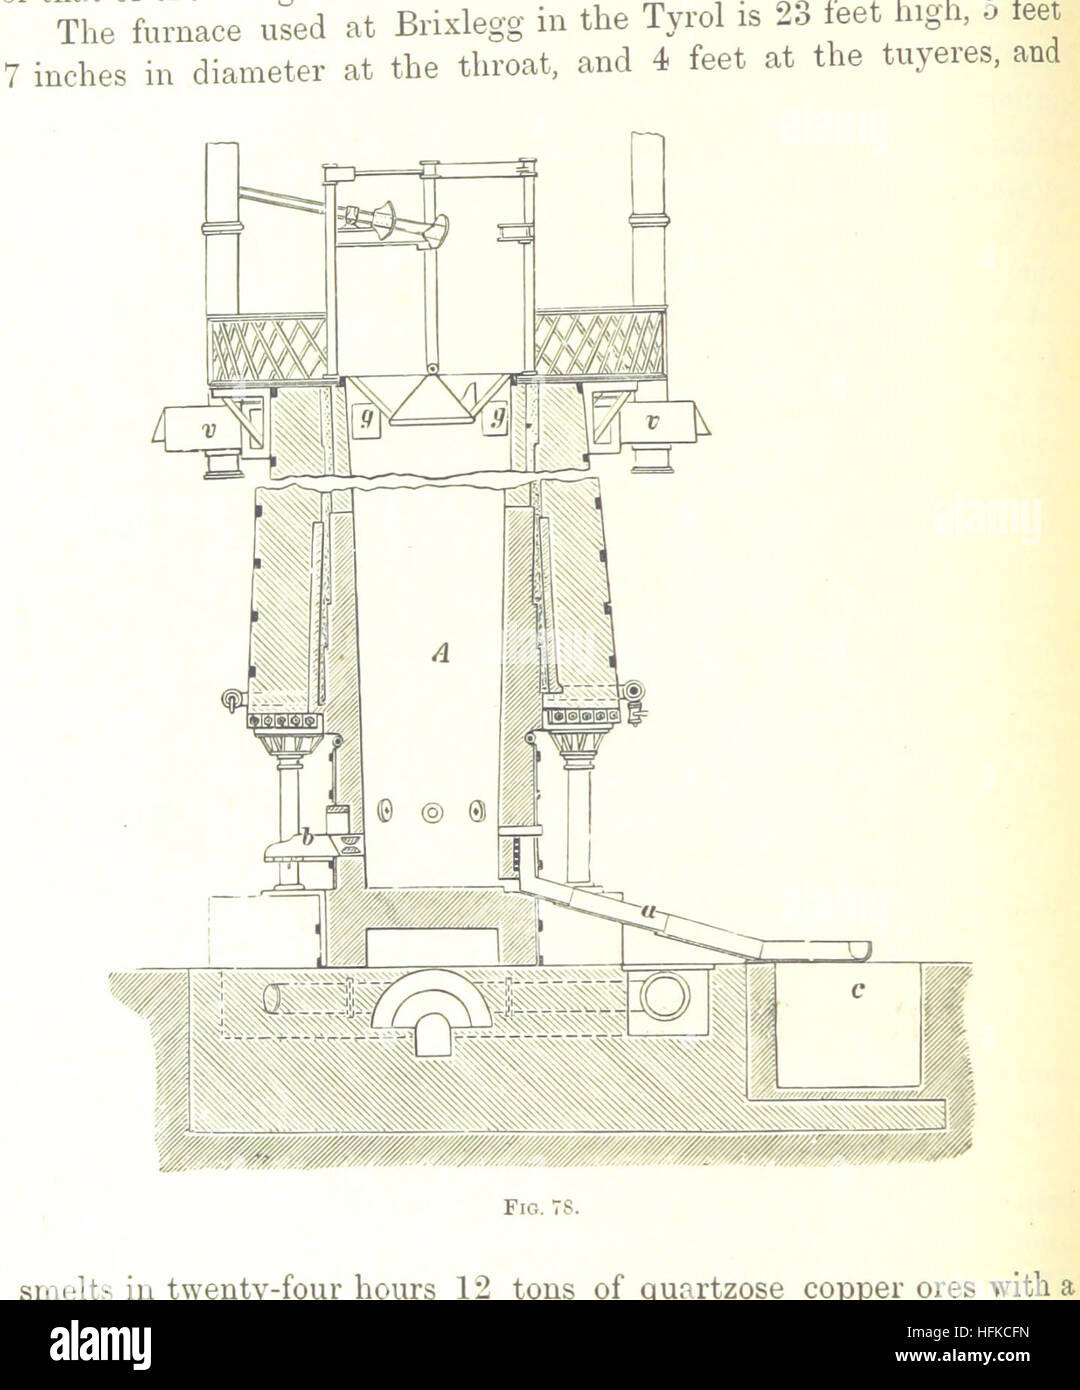 Image taken from page 120 of 'Handbook of Metallurgy ... Translated by H. Louis' Image taken from page 120 of 'Handbook of Metallurgy Stock Photo